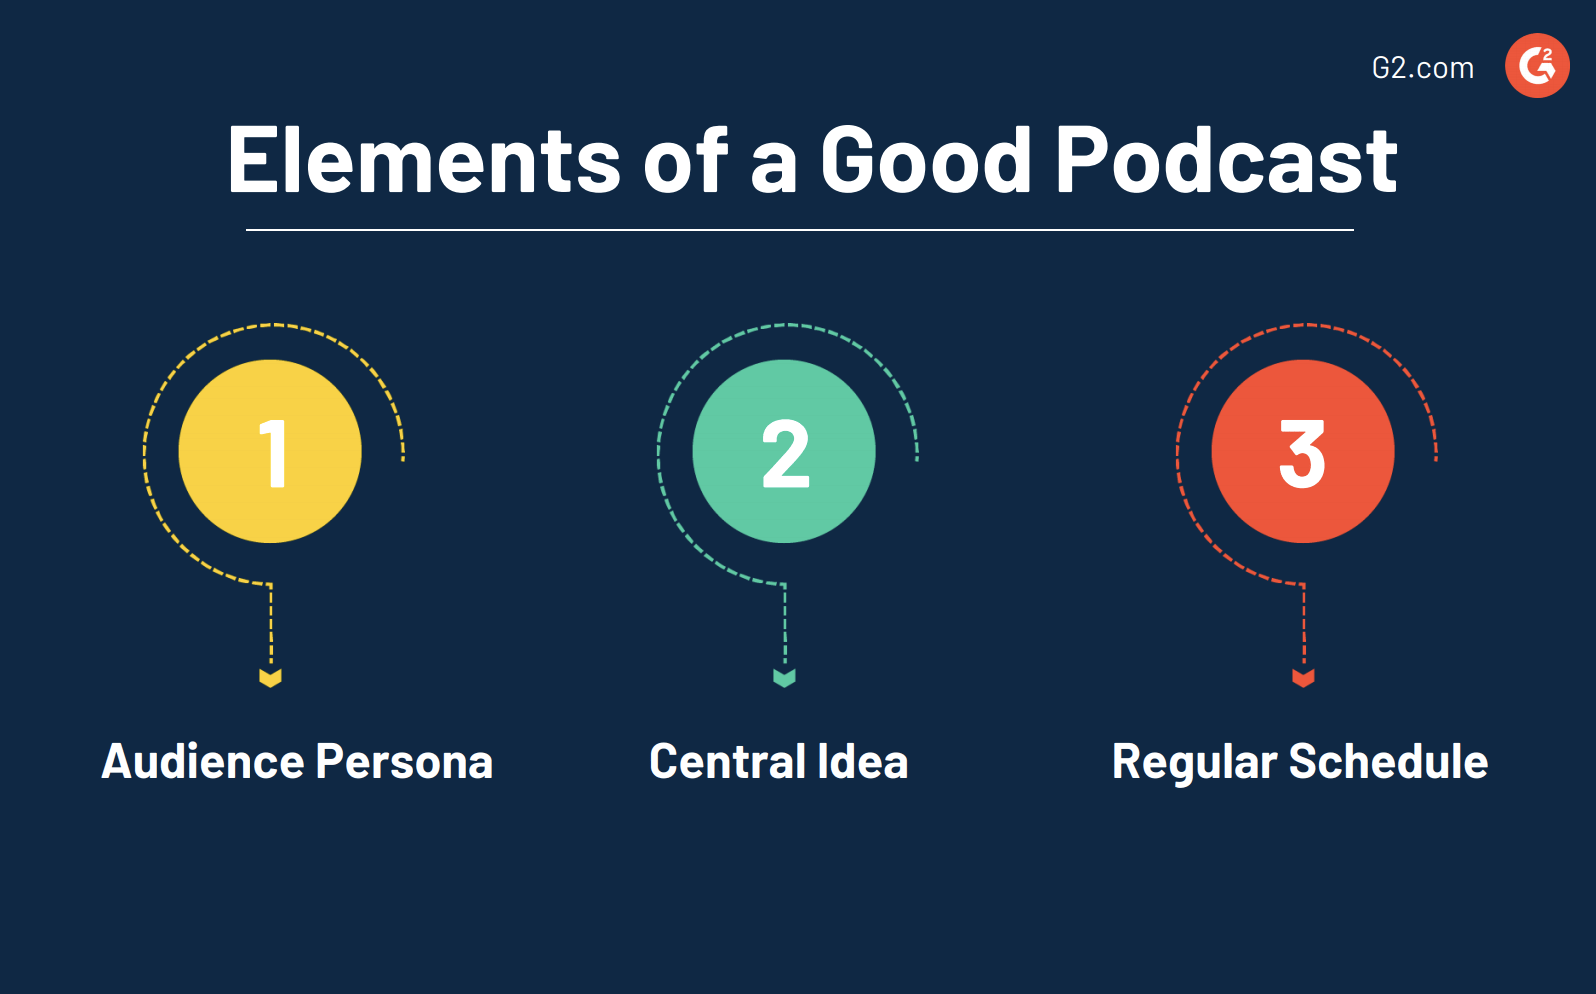 Elements of good podcasts